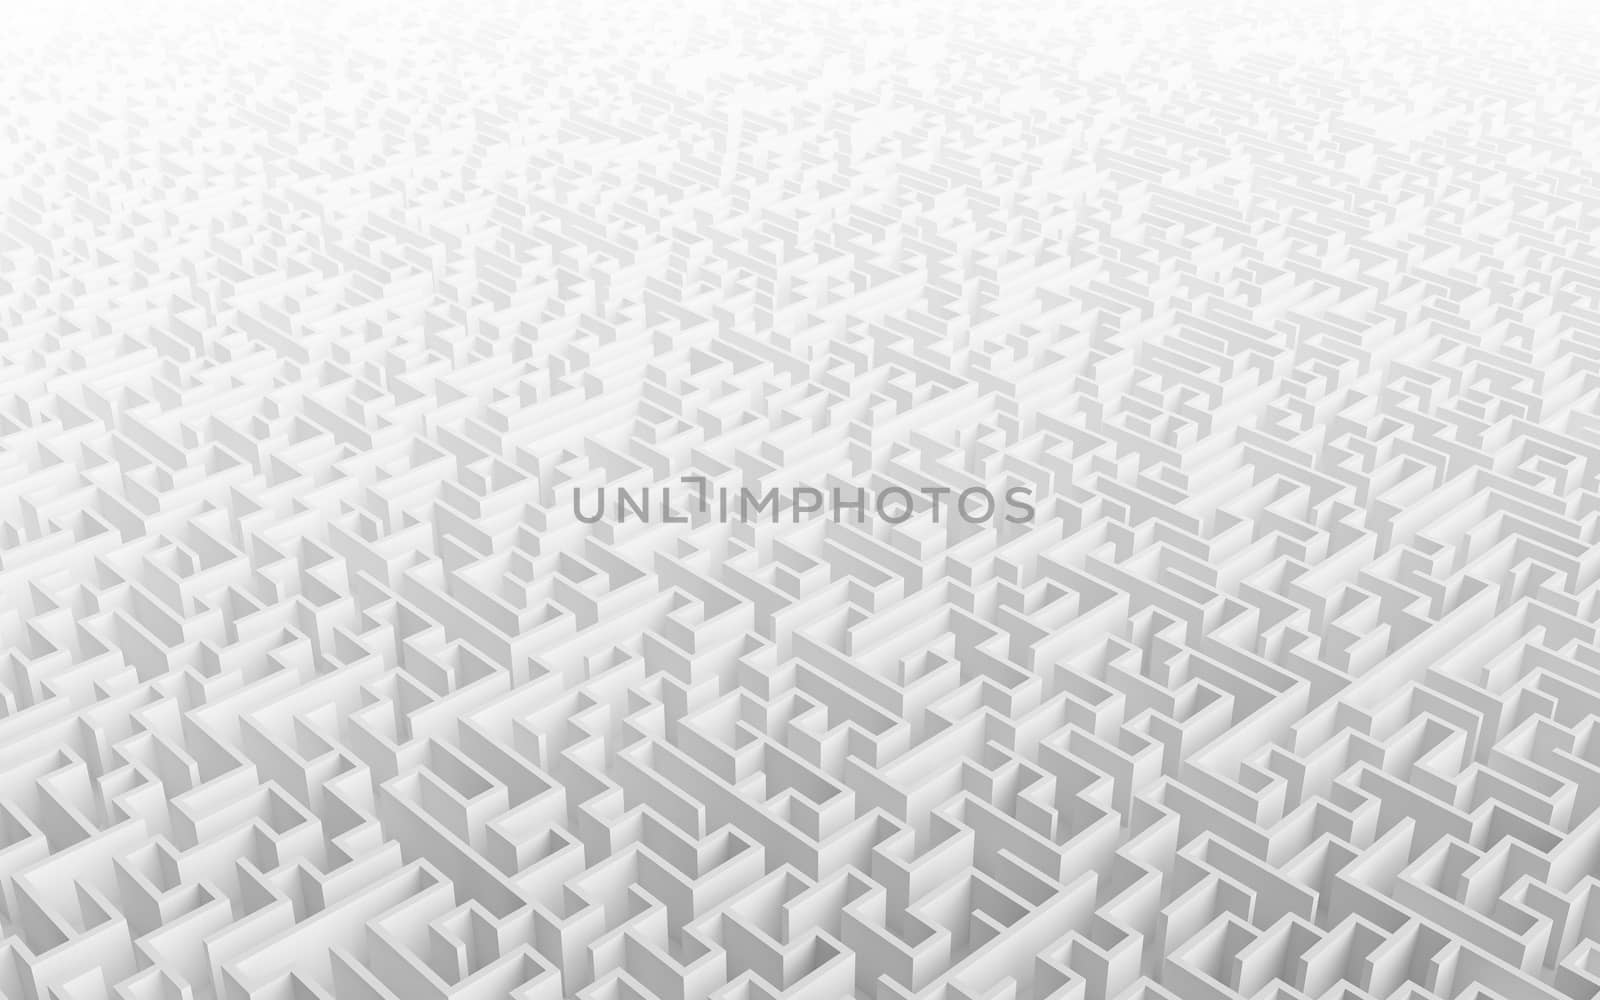 High quality illustration of a large maze or labyrinth by teerawit